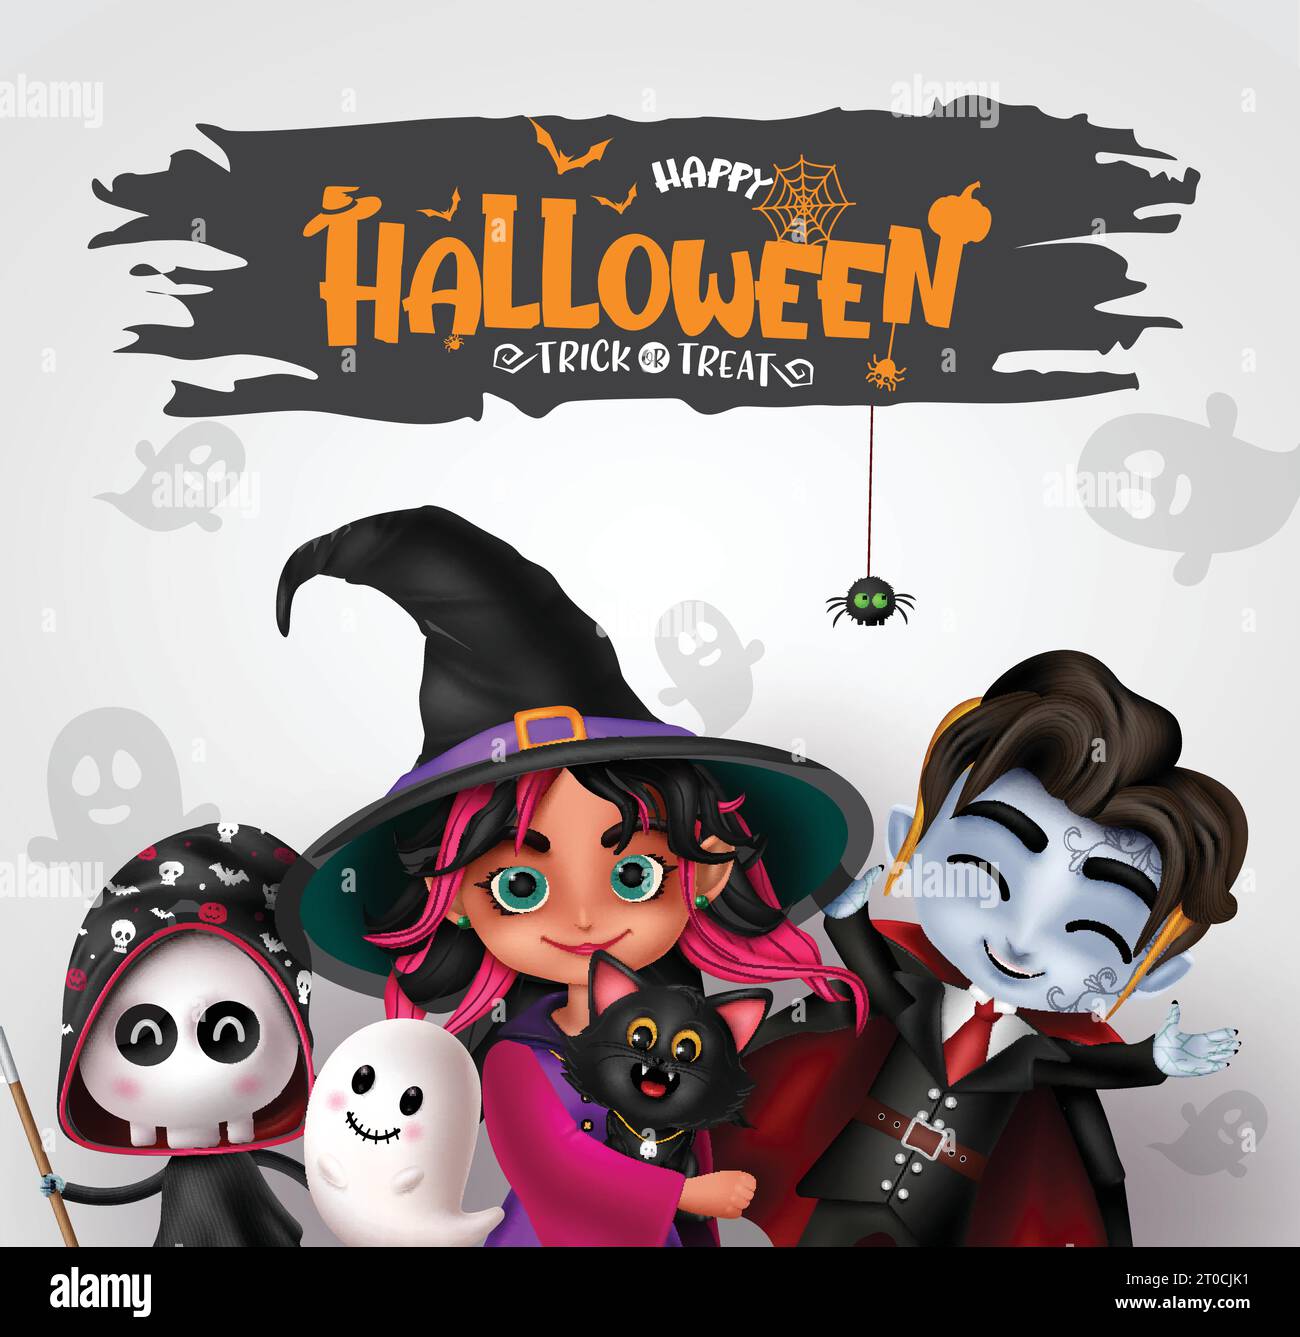 Halloween characters vector design. Happy halloween and trick or treat greeting text with cute witch girl, friendly vampire and grim reaper characters Stock Vector